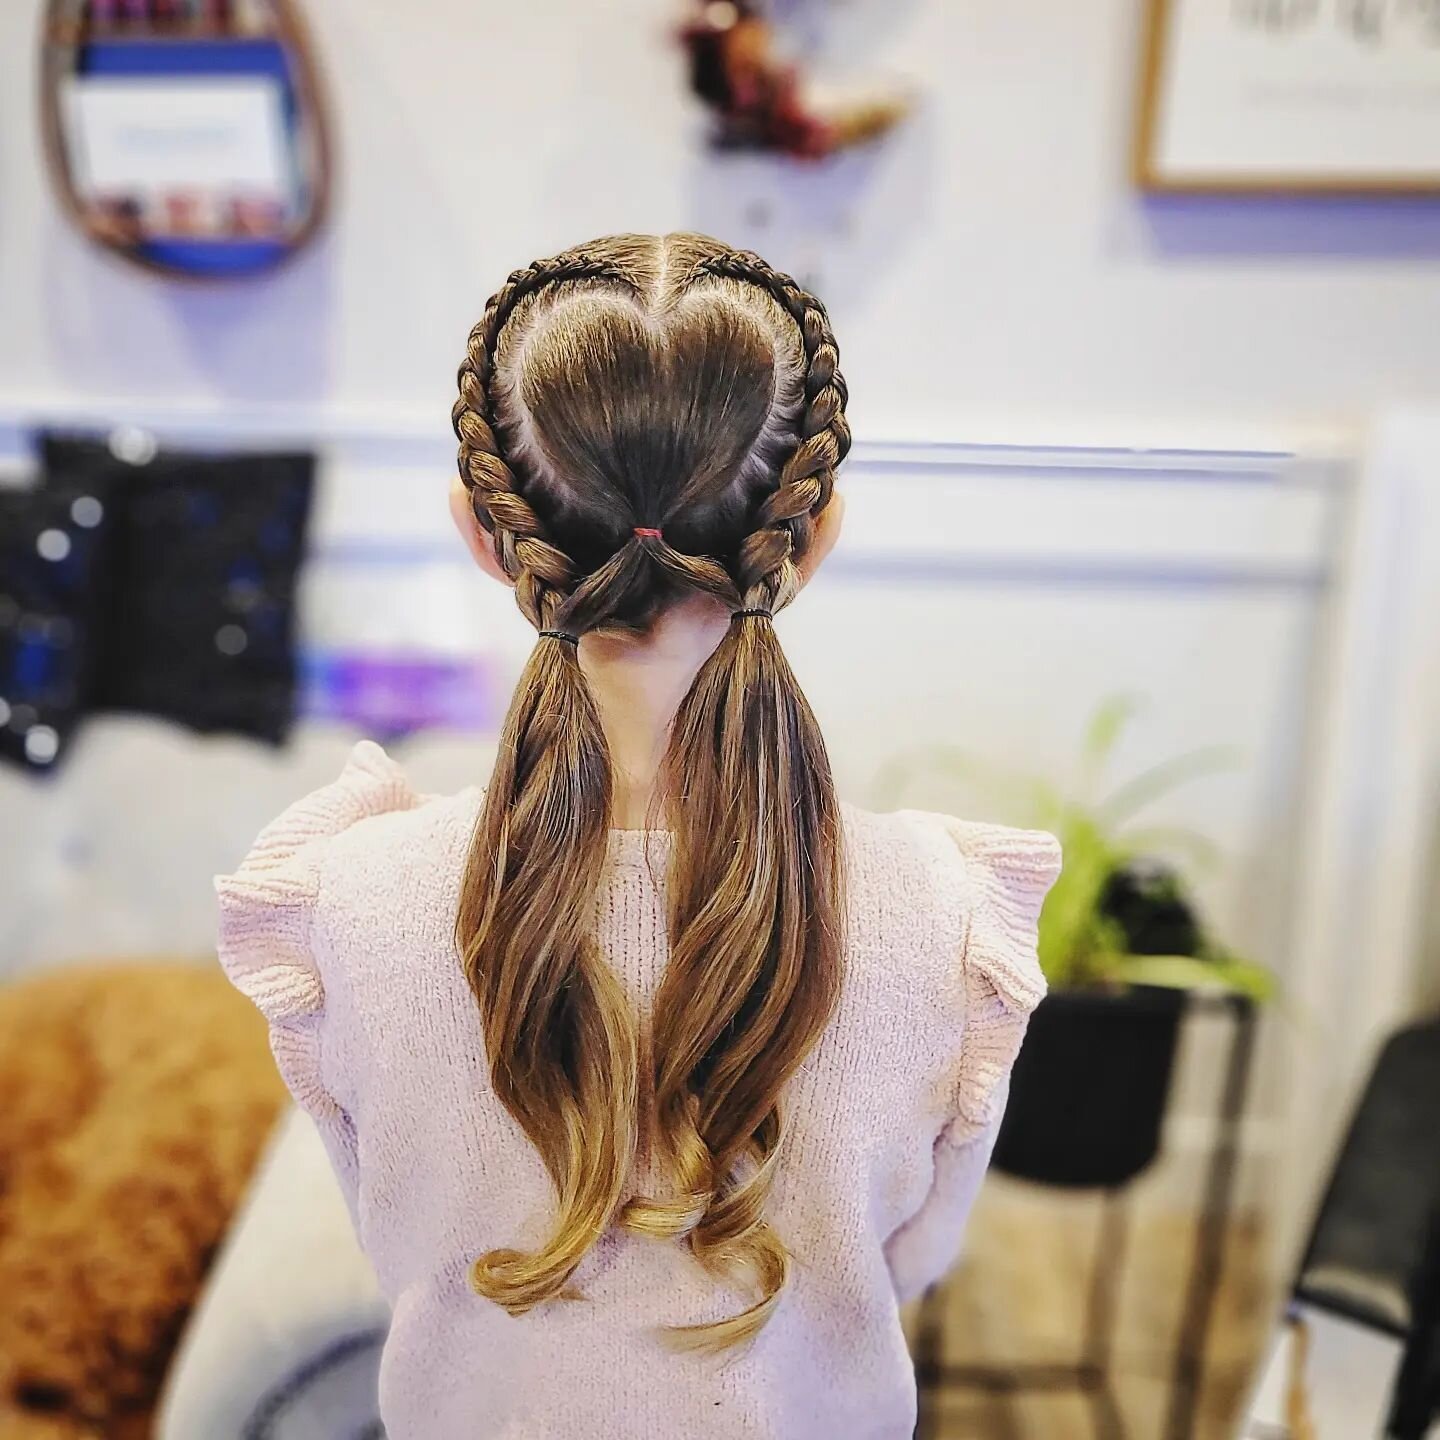 ❤️ Happy Valentines Day ❤️ All the love to you today! #valentinehair #valentinehair  #kidshair #heart #sharethelove